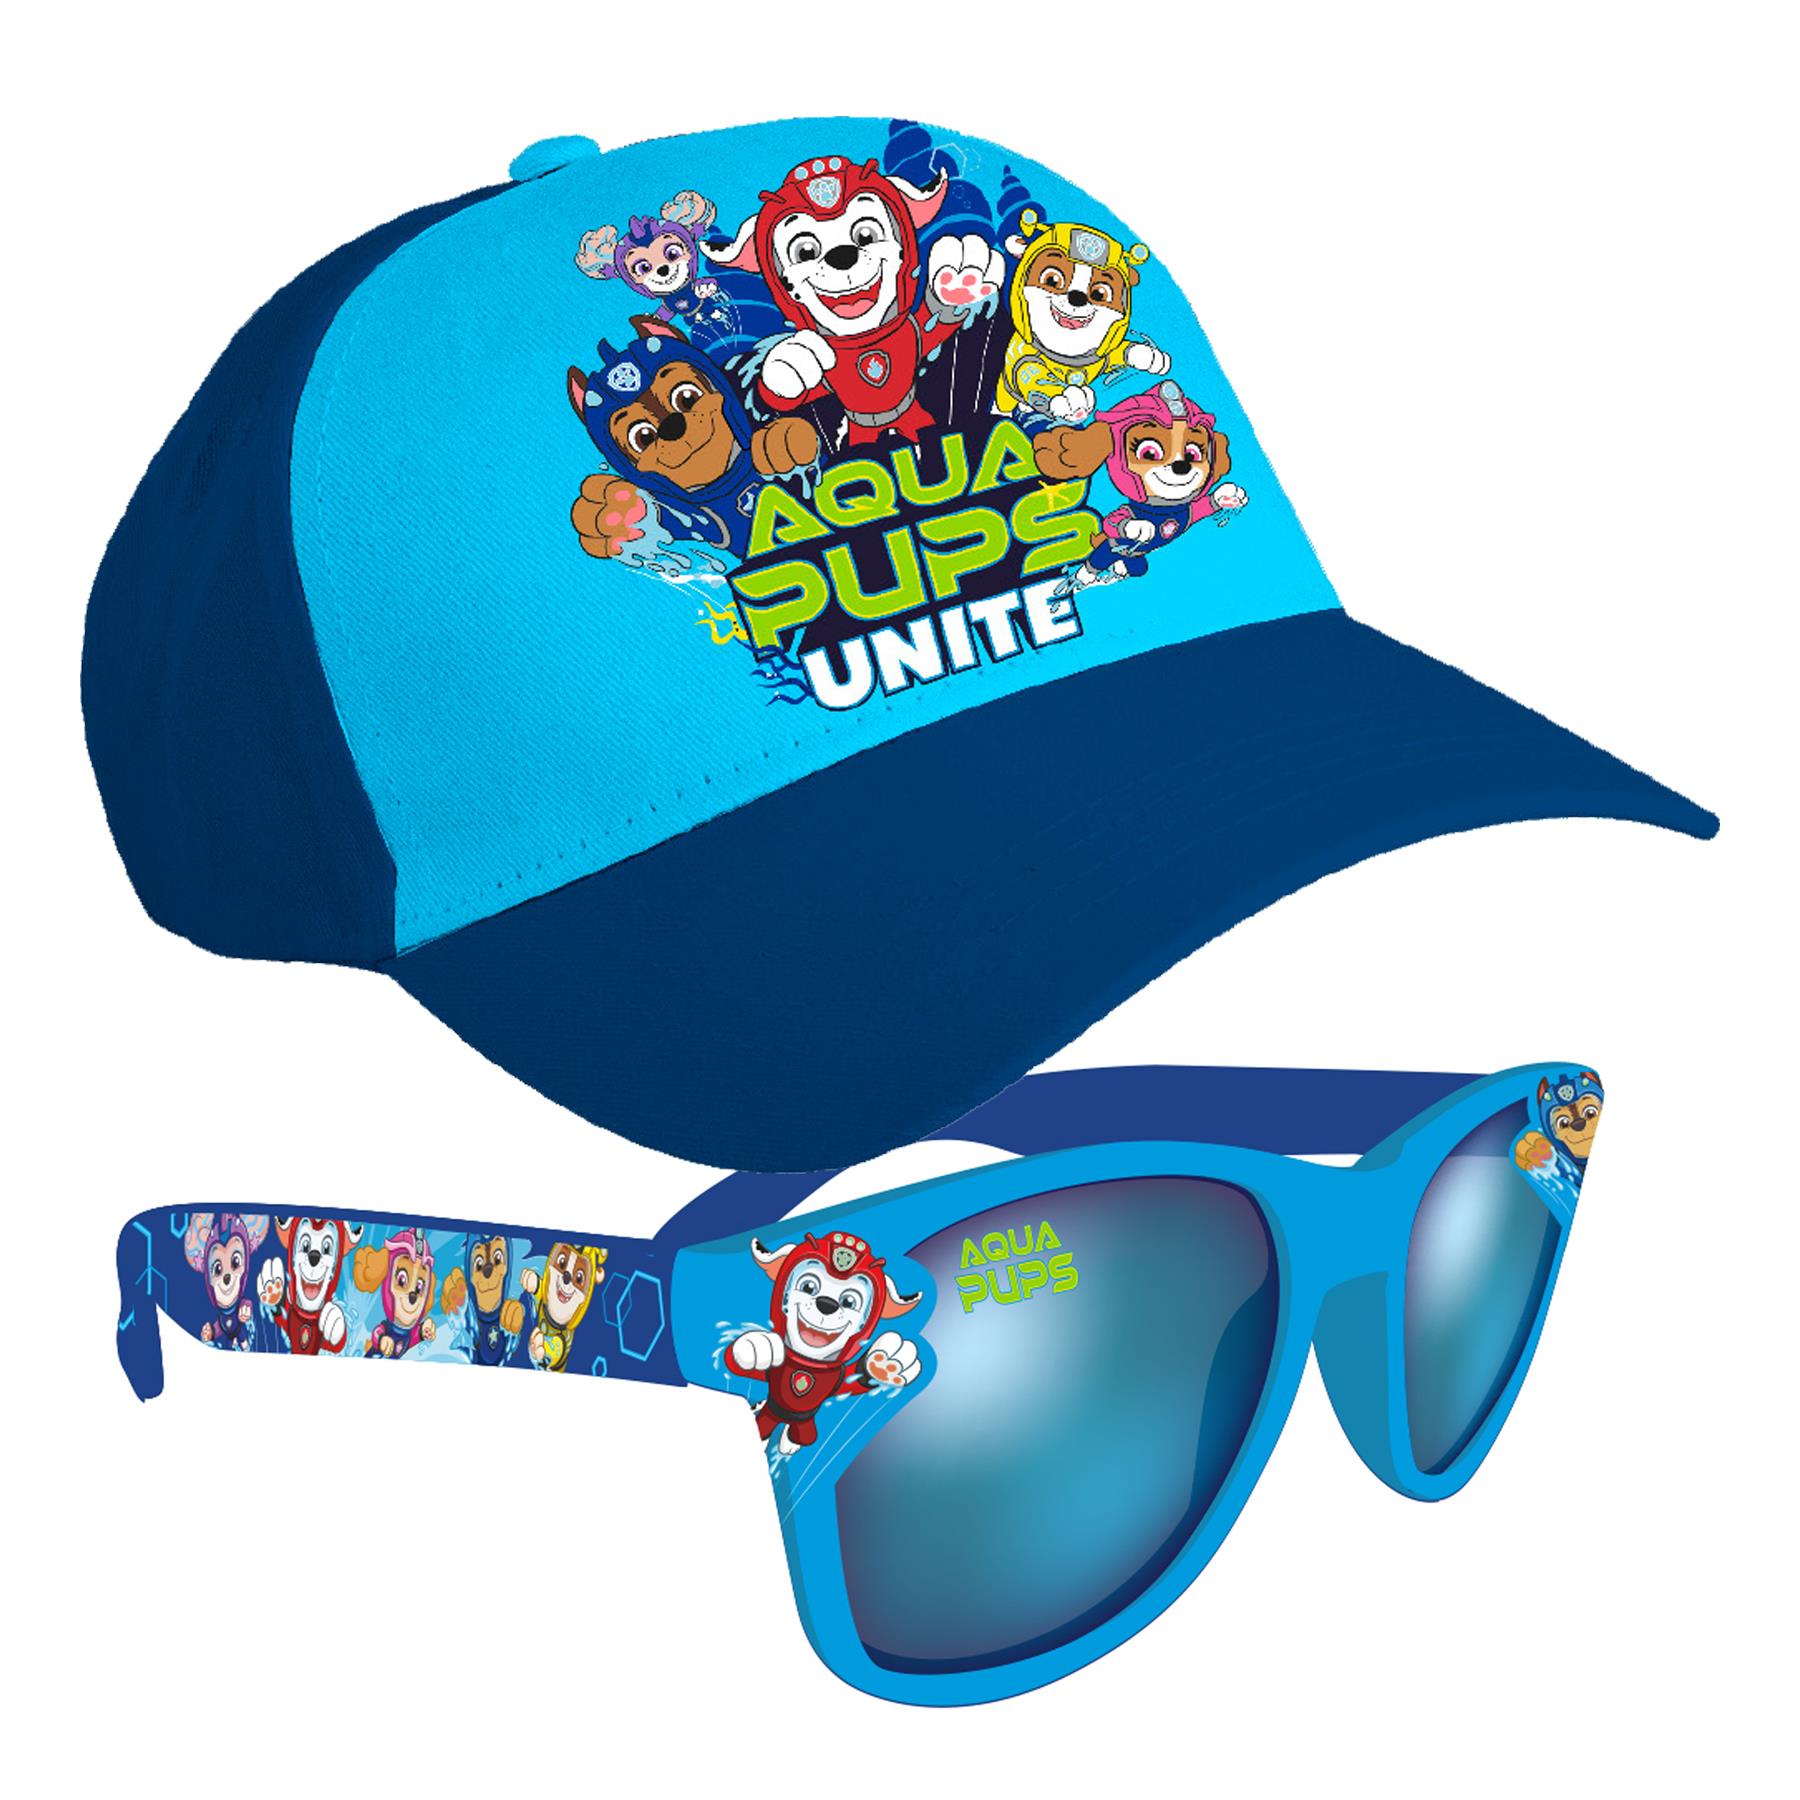 Paw Patrol Children's Summer Hat and Sunglasses UV protection for Holiday